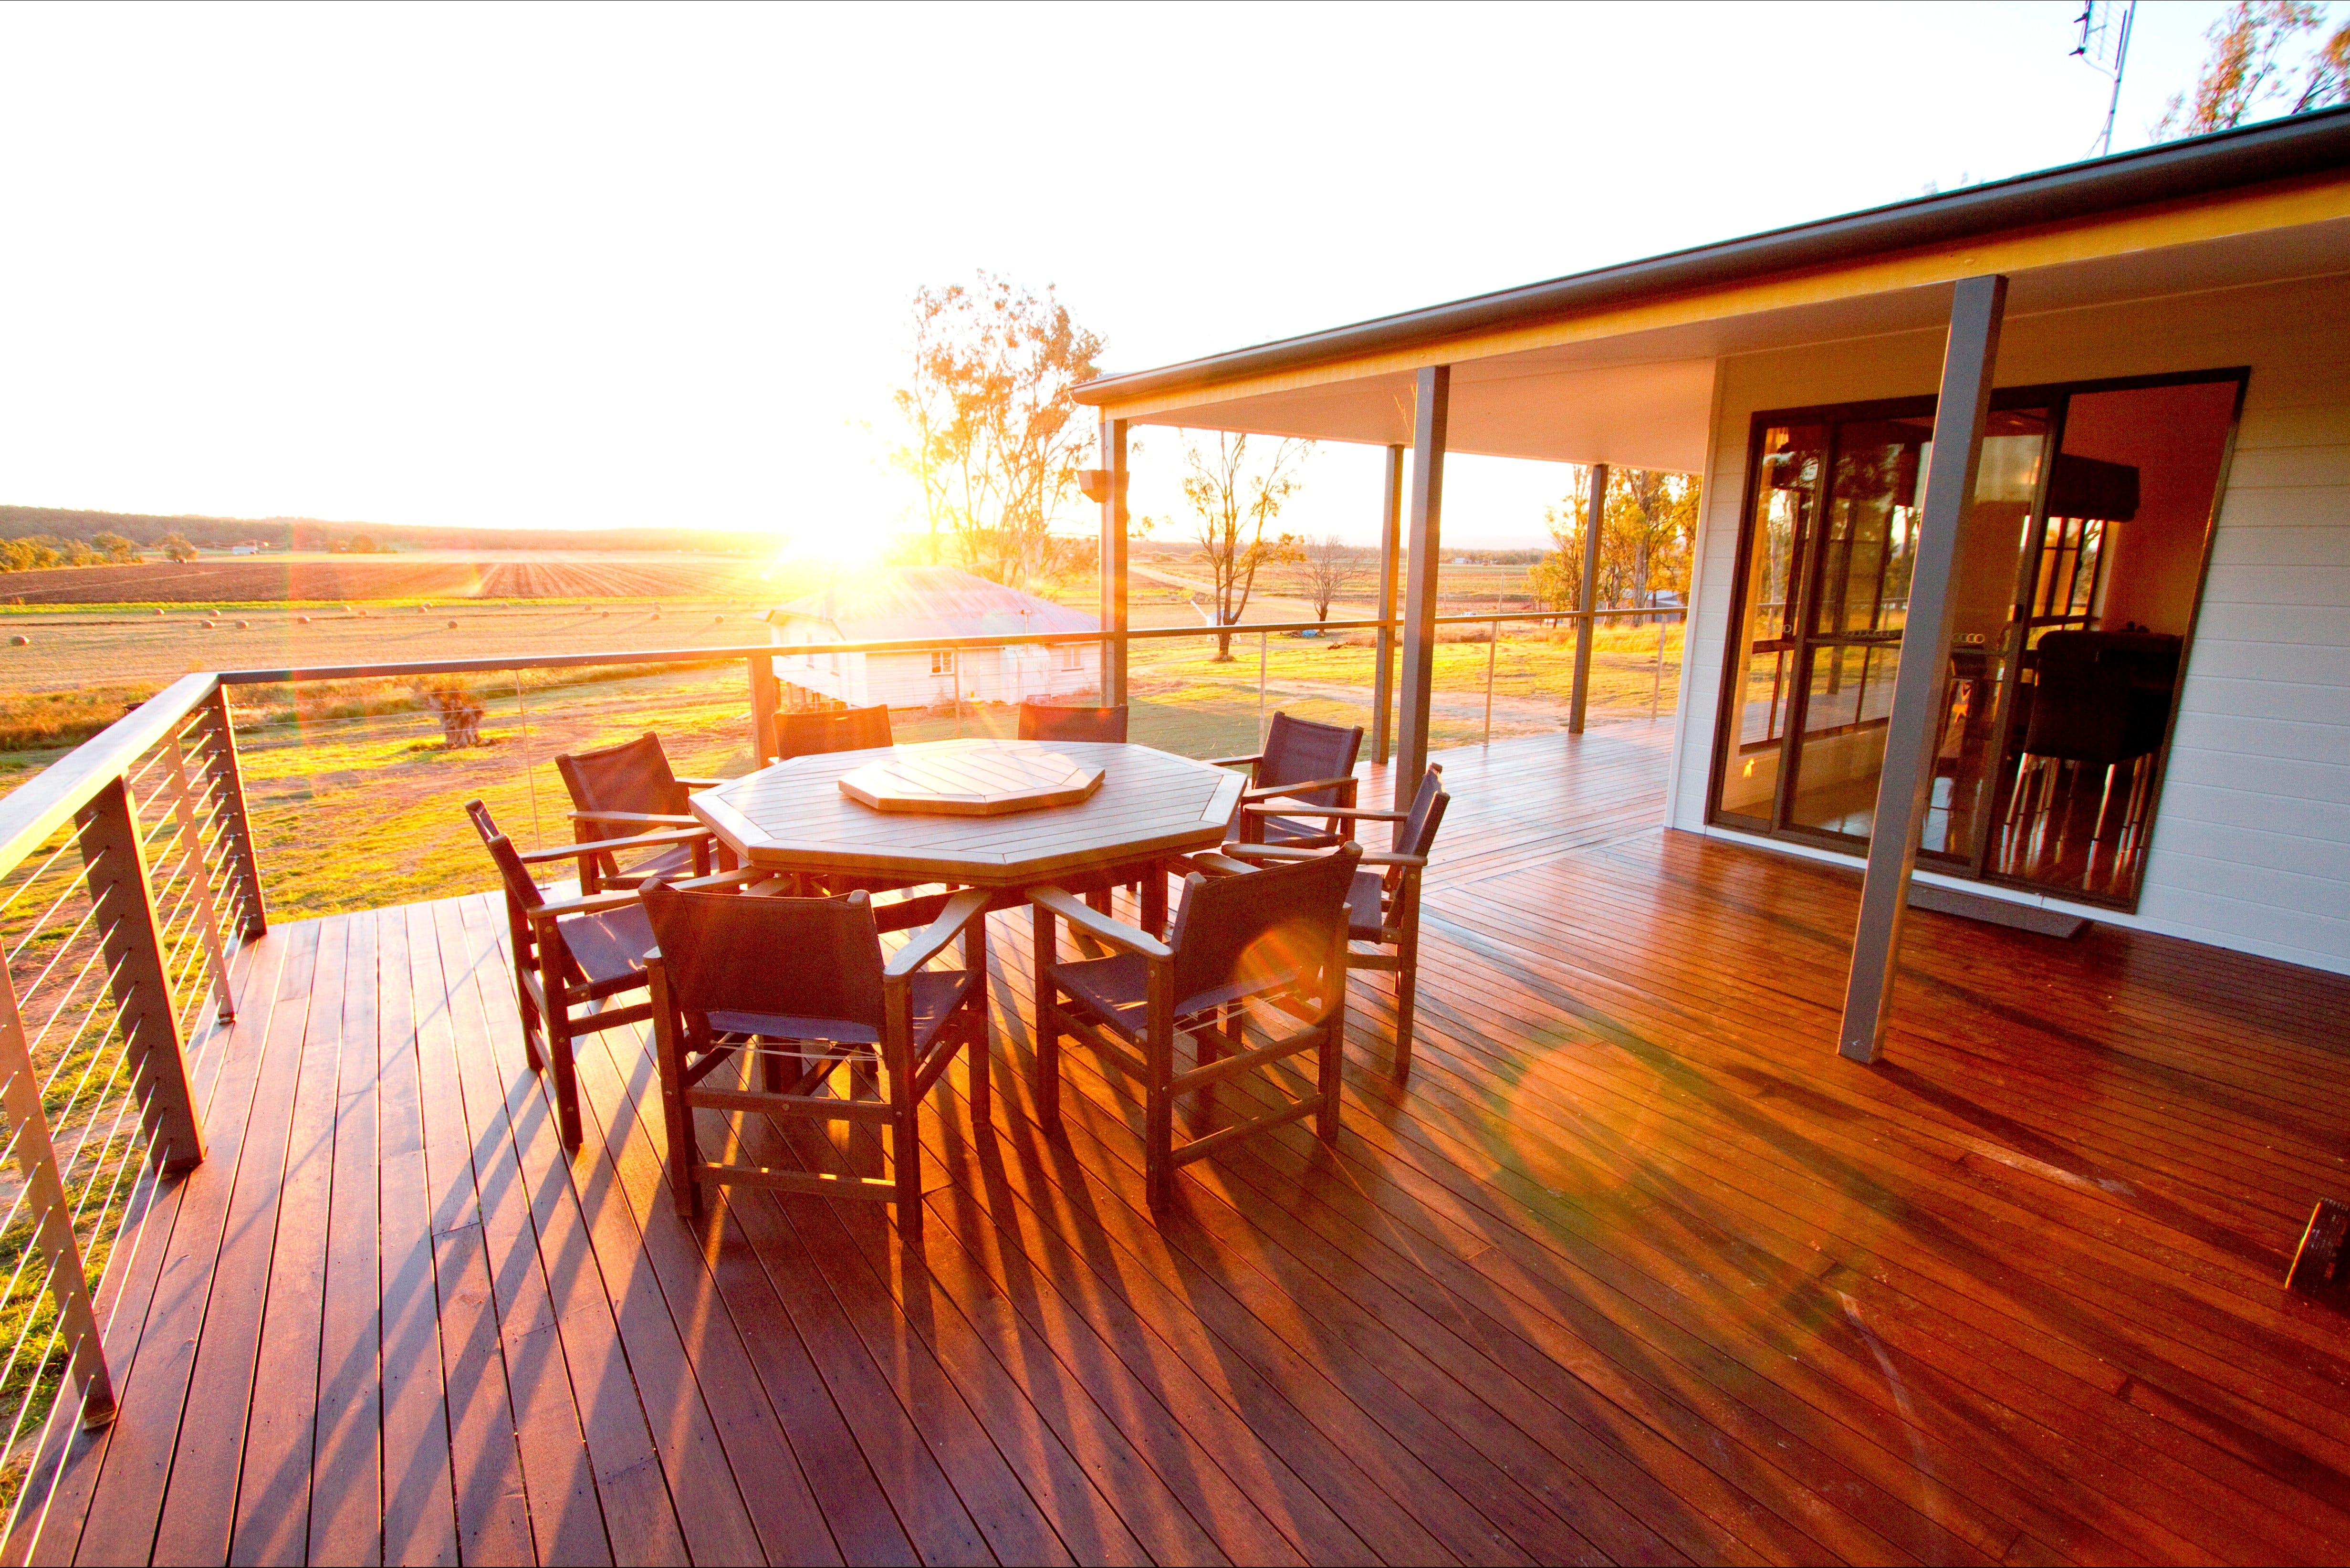 Stockton Rise Country Retreat - Townsville Tourism